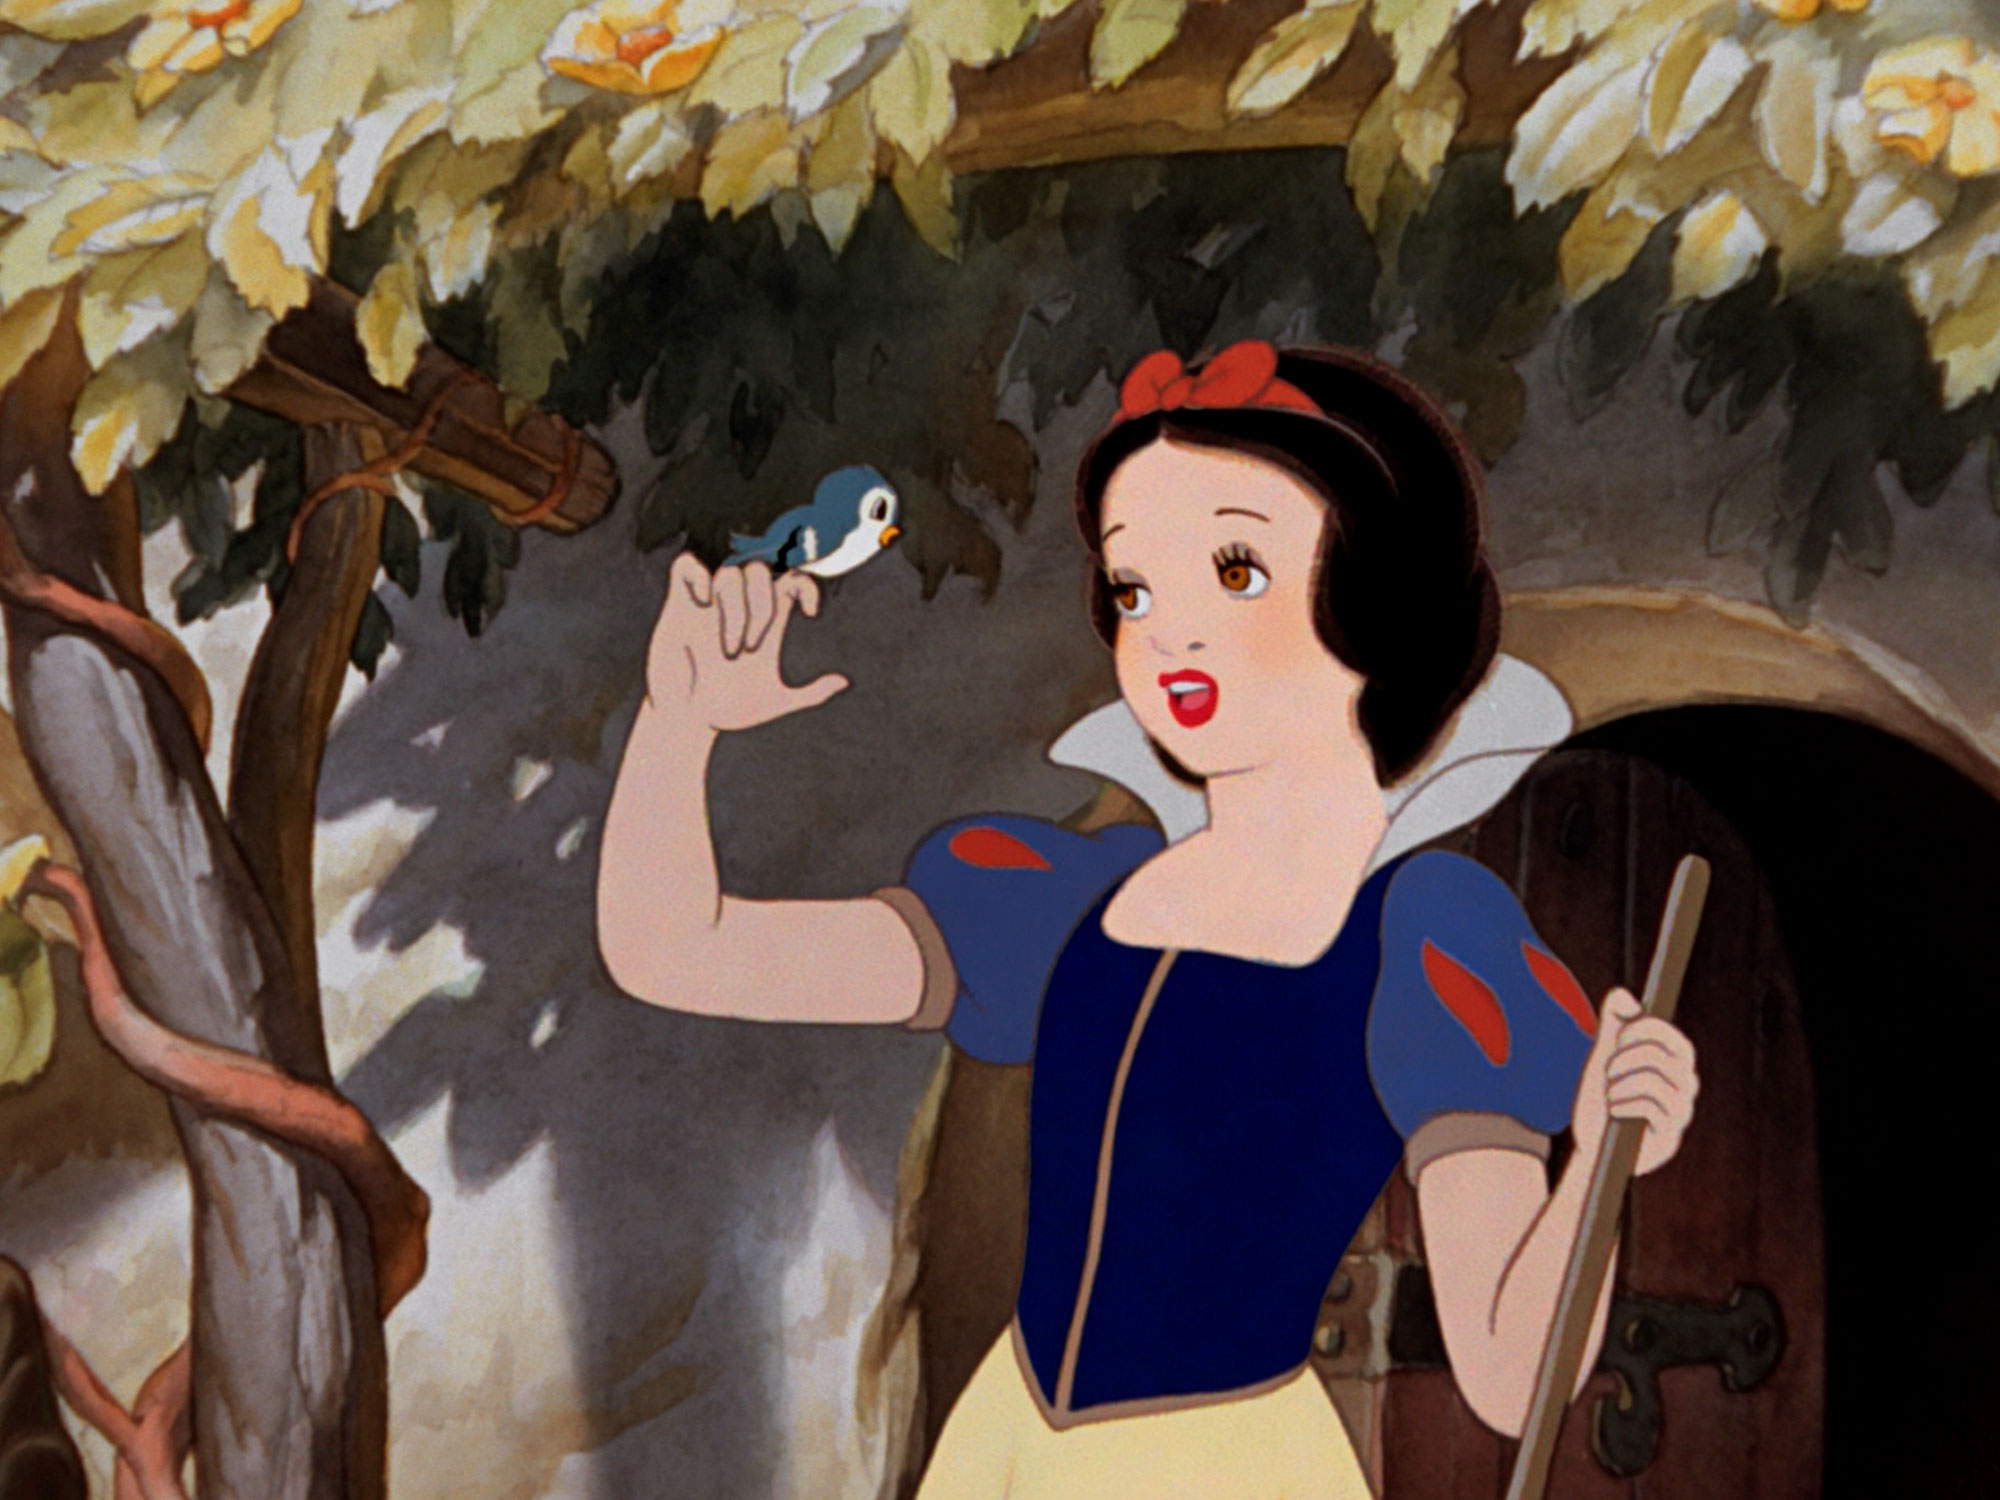 Snow White stands near a tree with a bird perched on her finger.